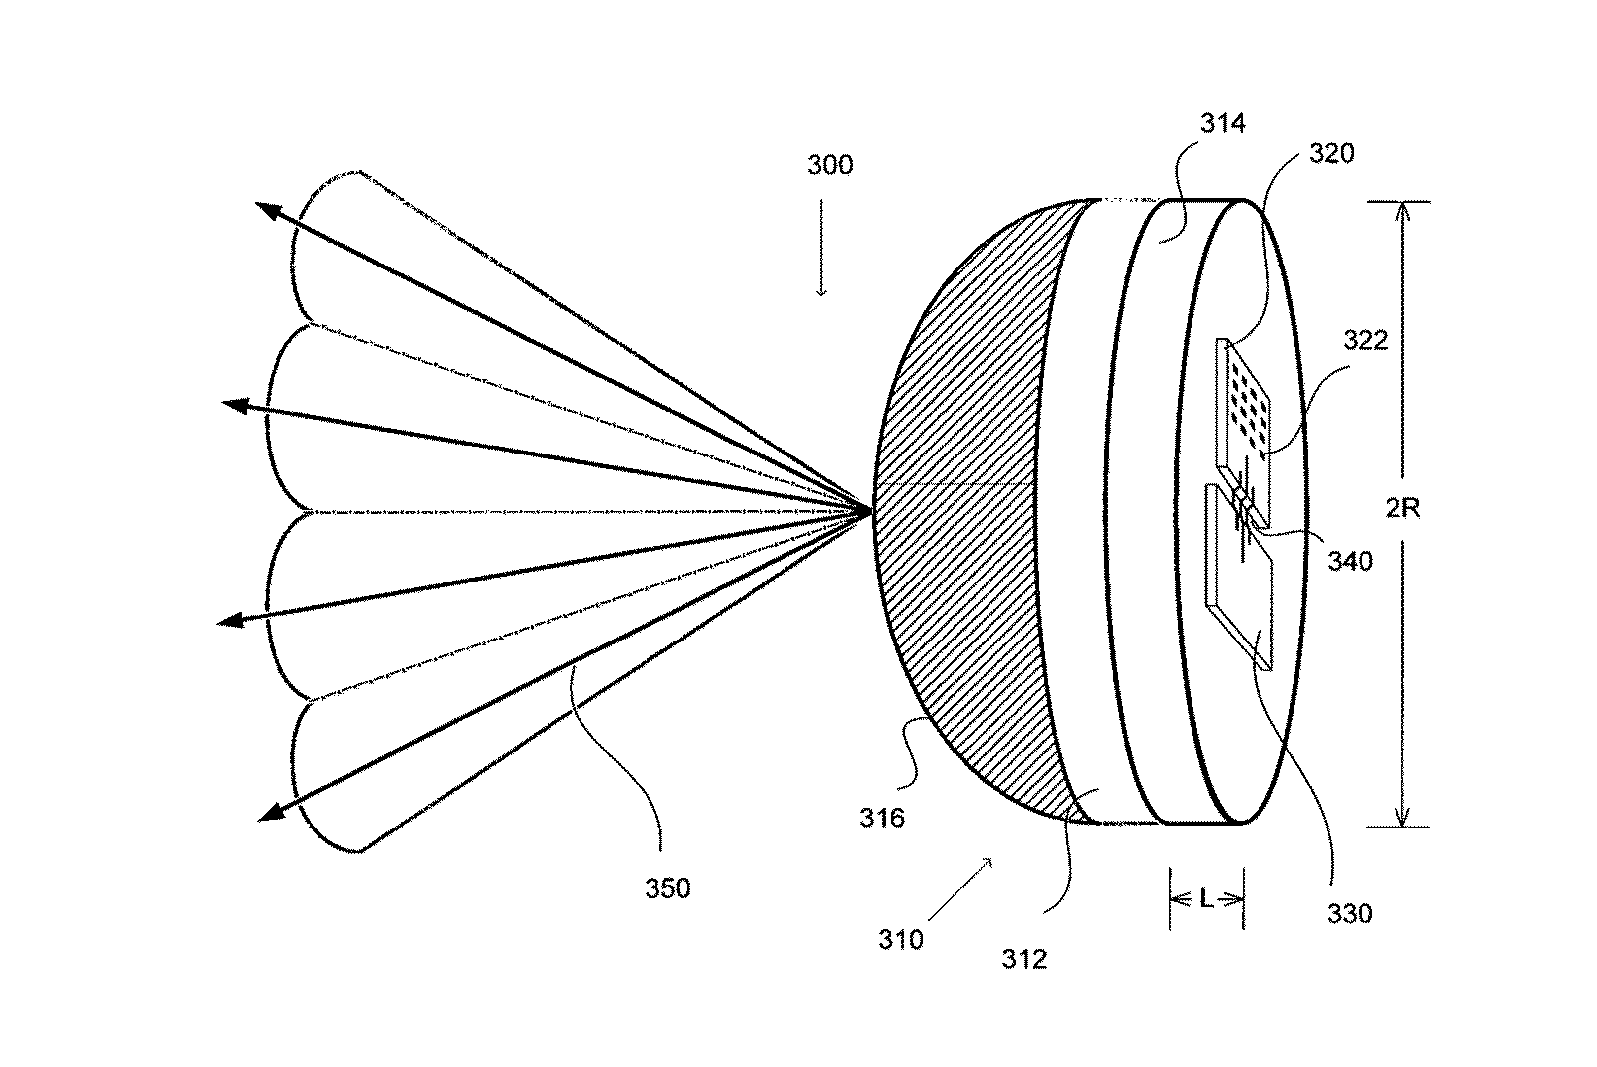 Lens antenna with electronic beam steering capabilities